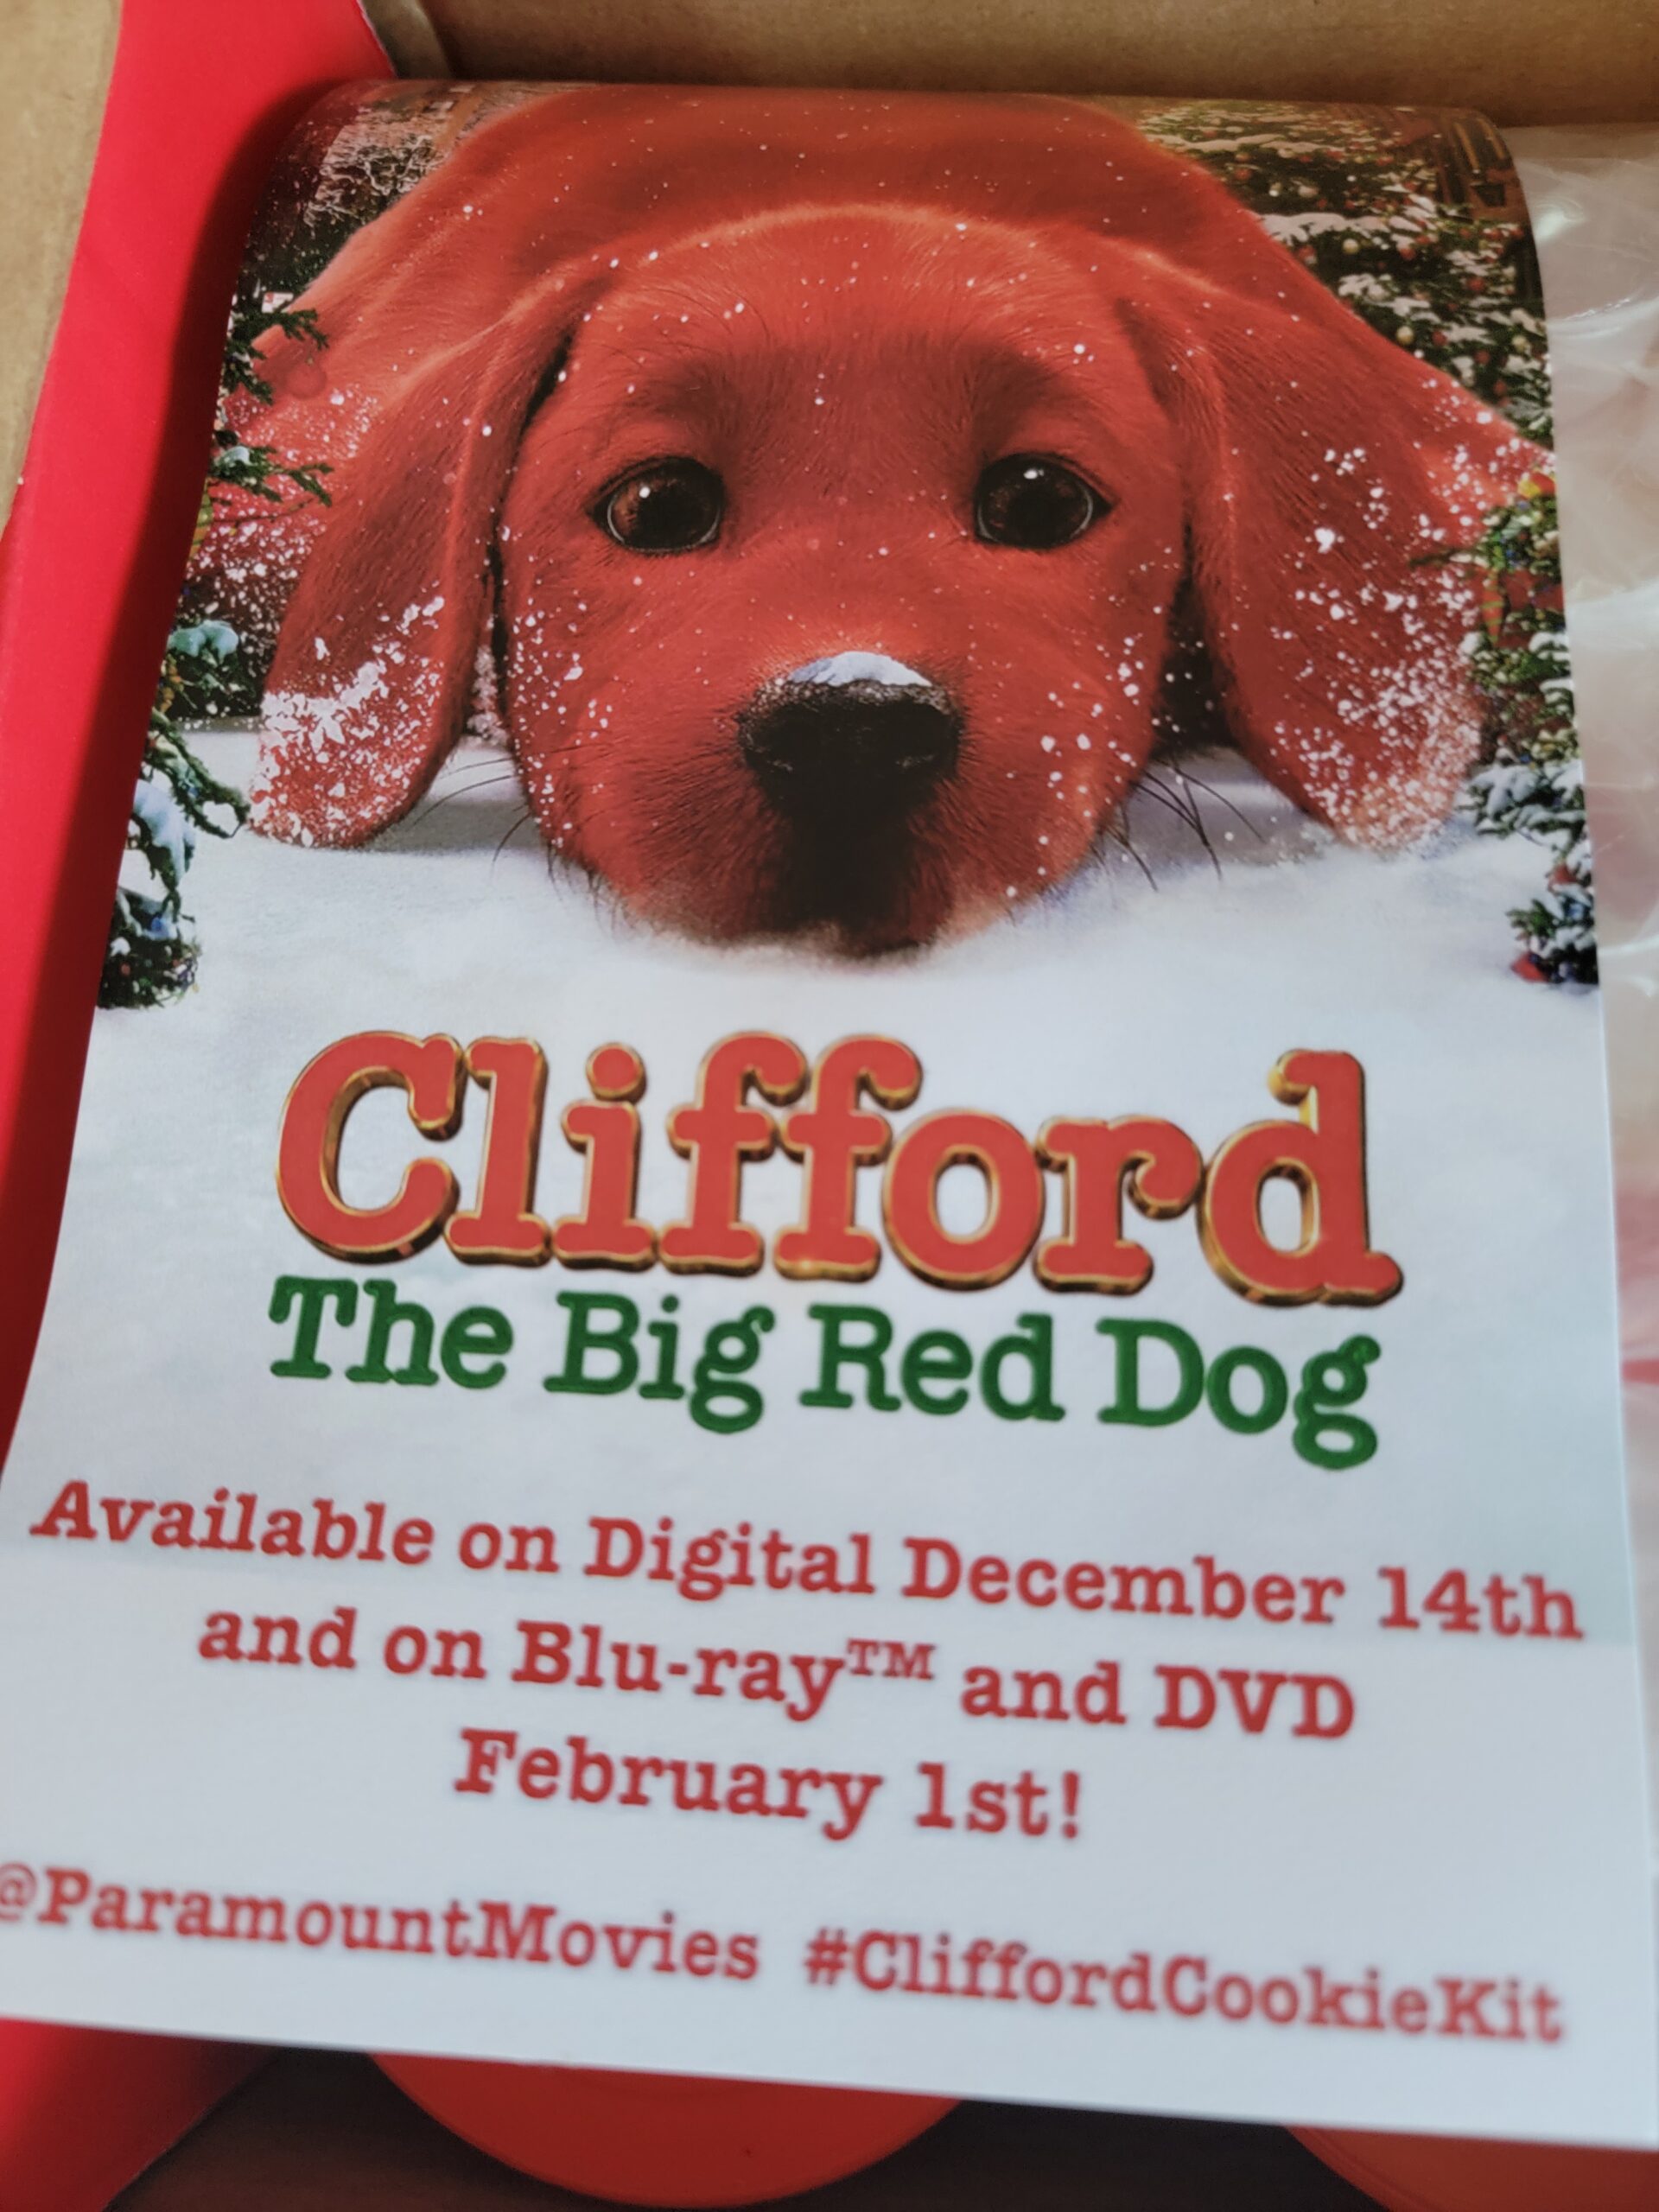 Scholastic Unleashes New 'Clifford the Big Red Dog' Products